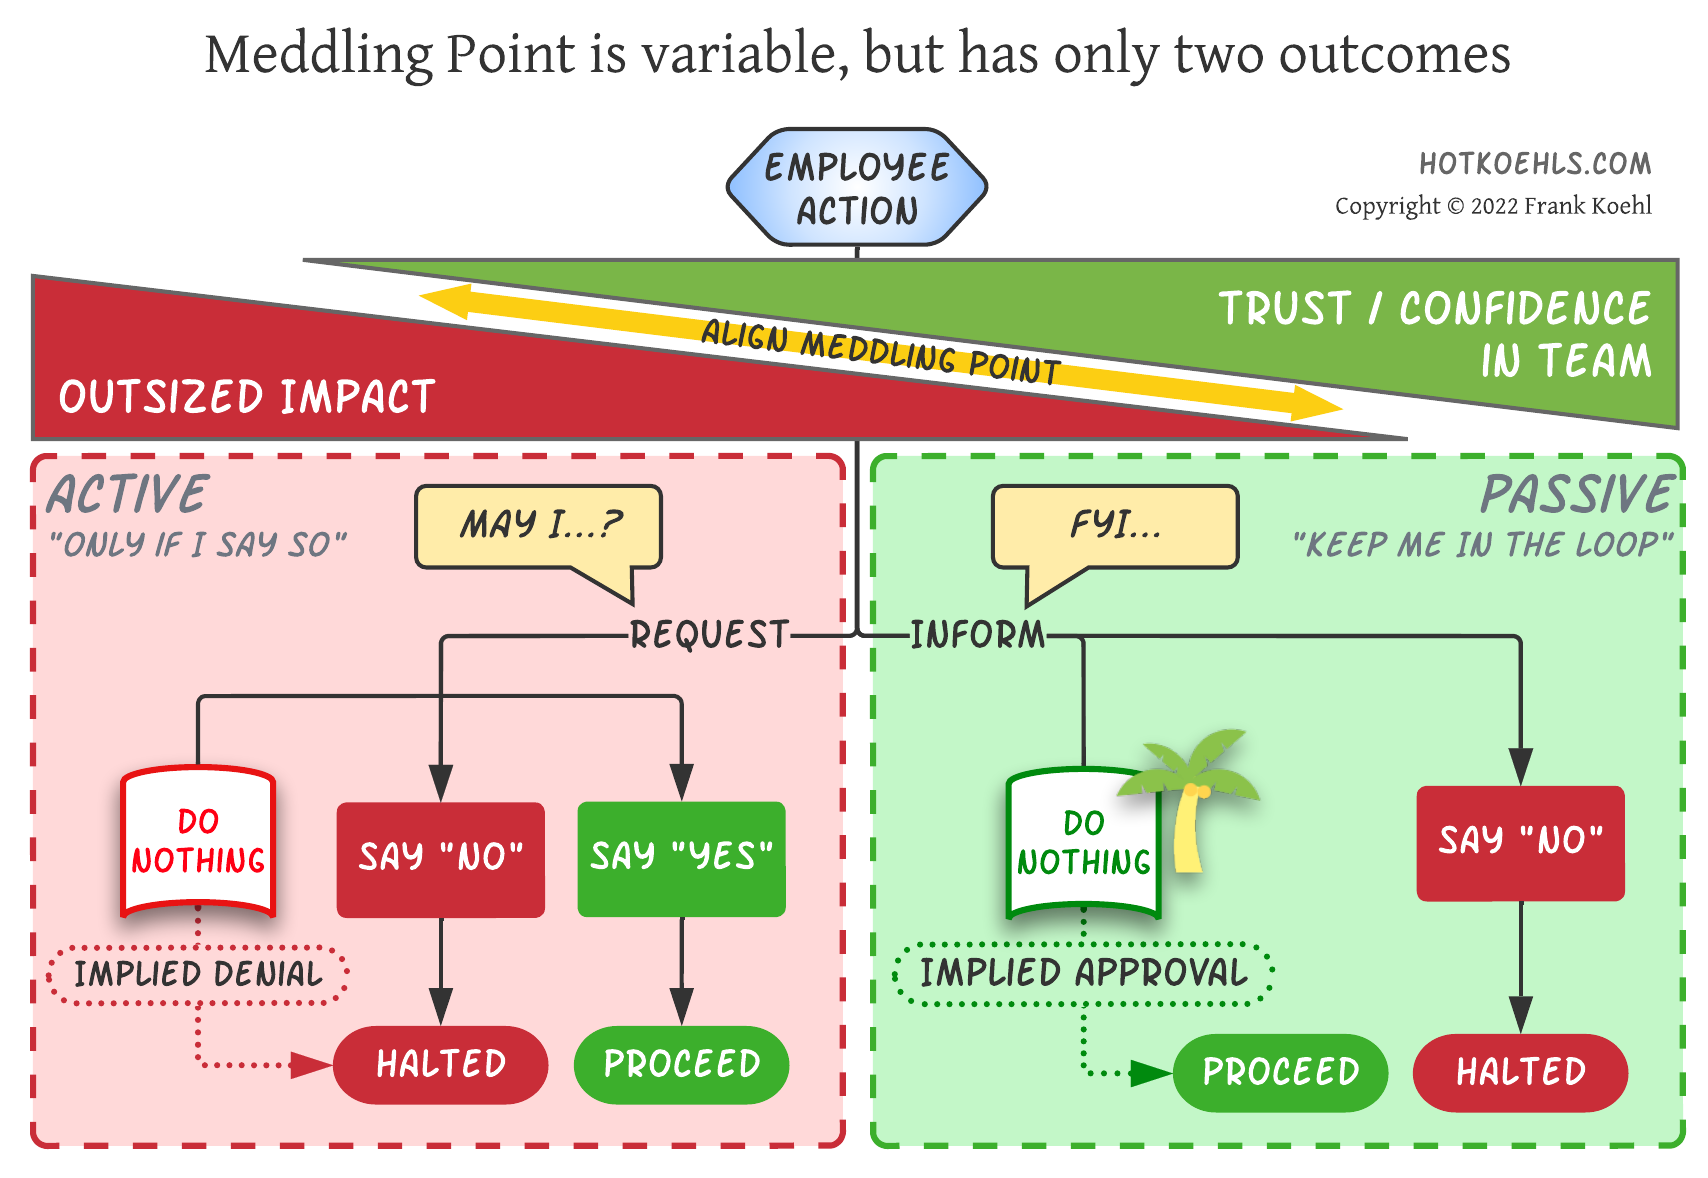 meddling point is variable but has only two outcomes